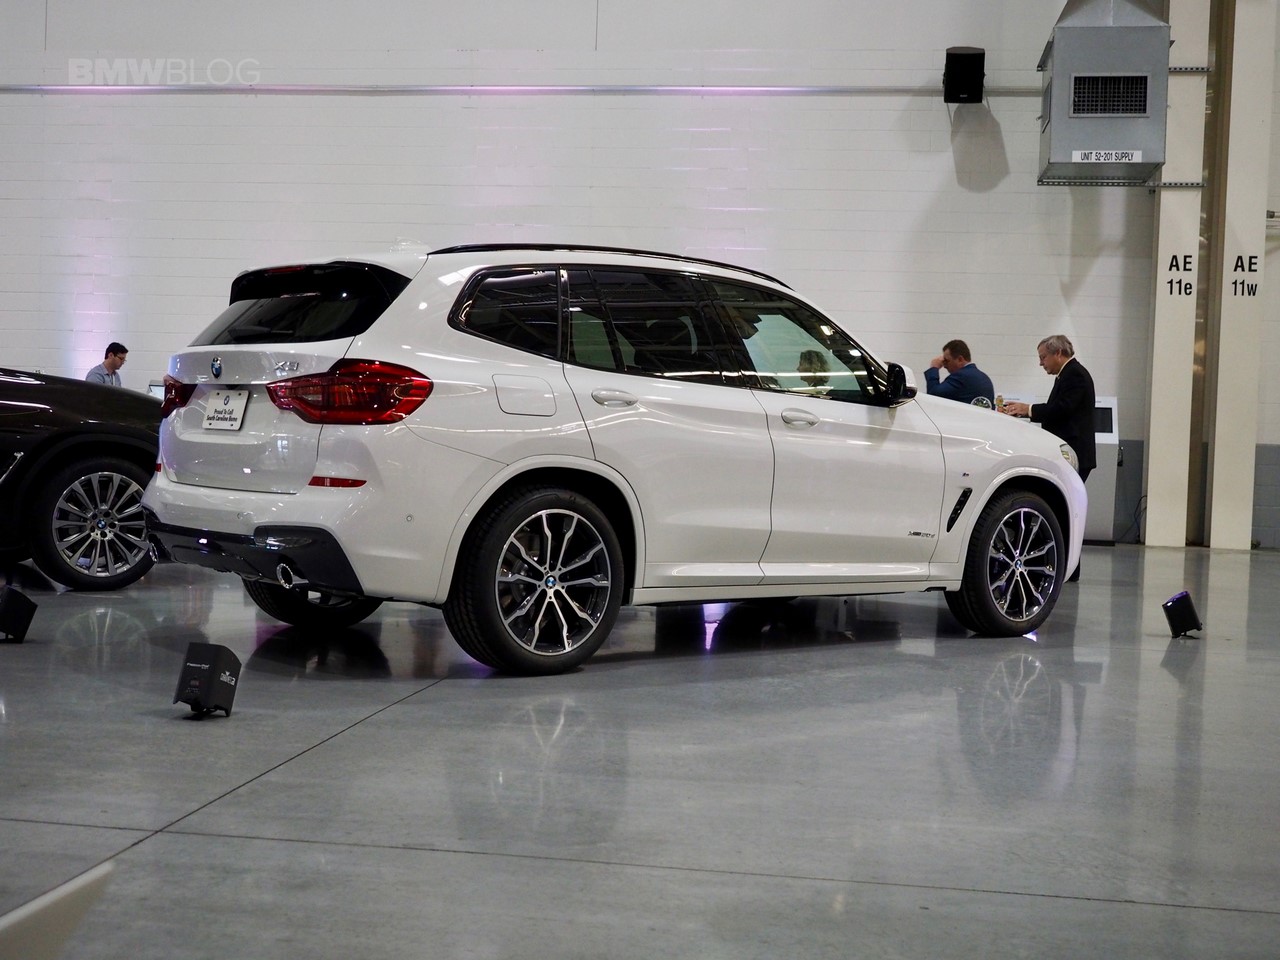 BMW X3 [G01] (2017 - 2021) used car review, Car review